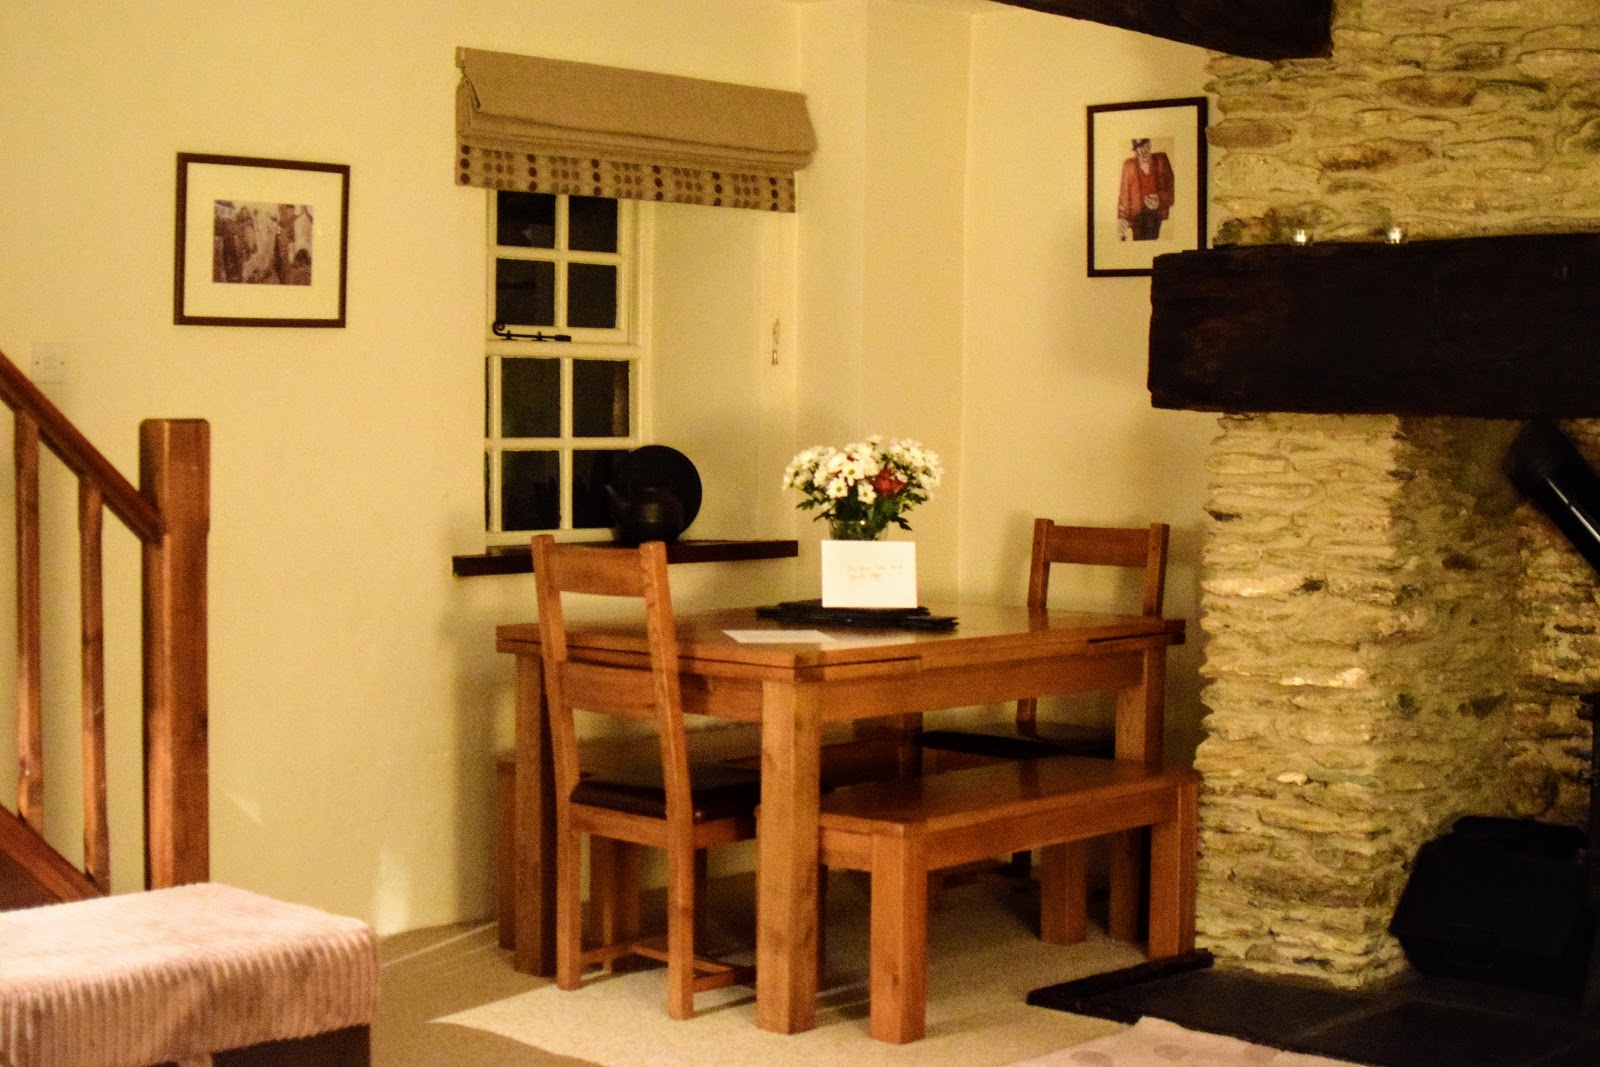 , Clydey Cottages, Pembrokeshire, Wales:  A Fun and Relaxing Holiday with Kids